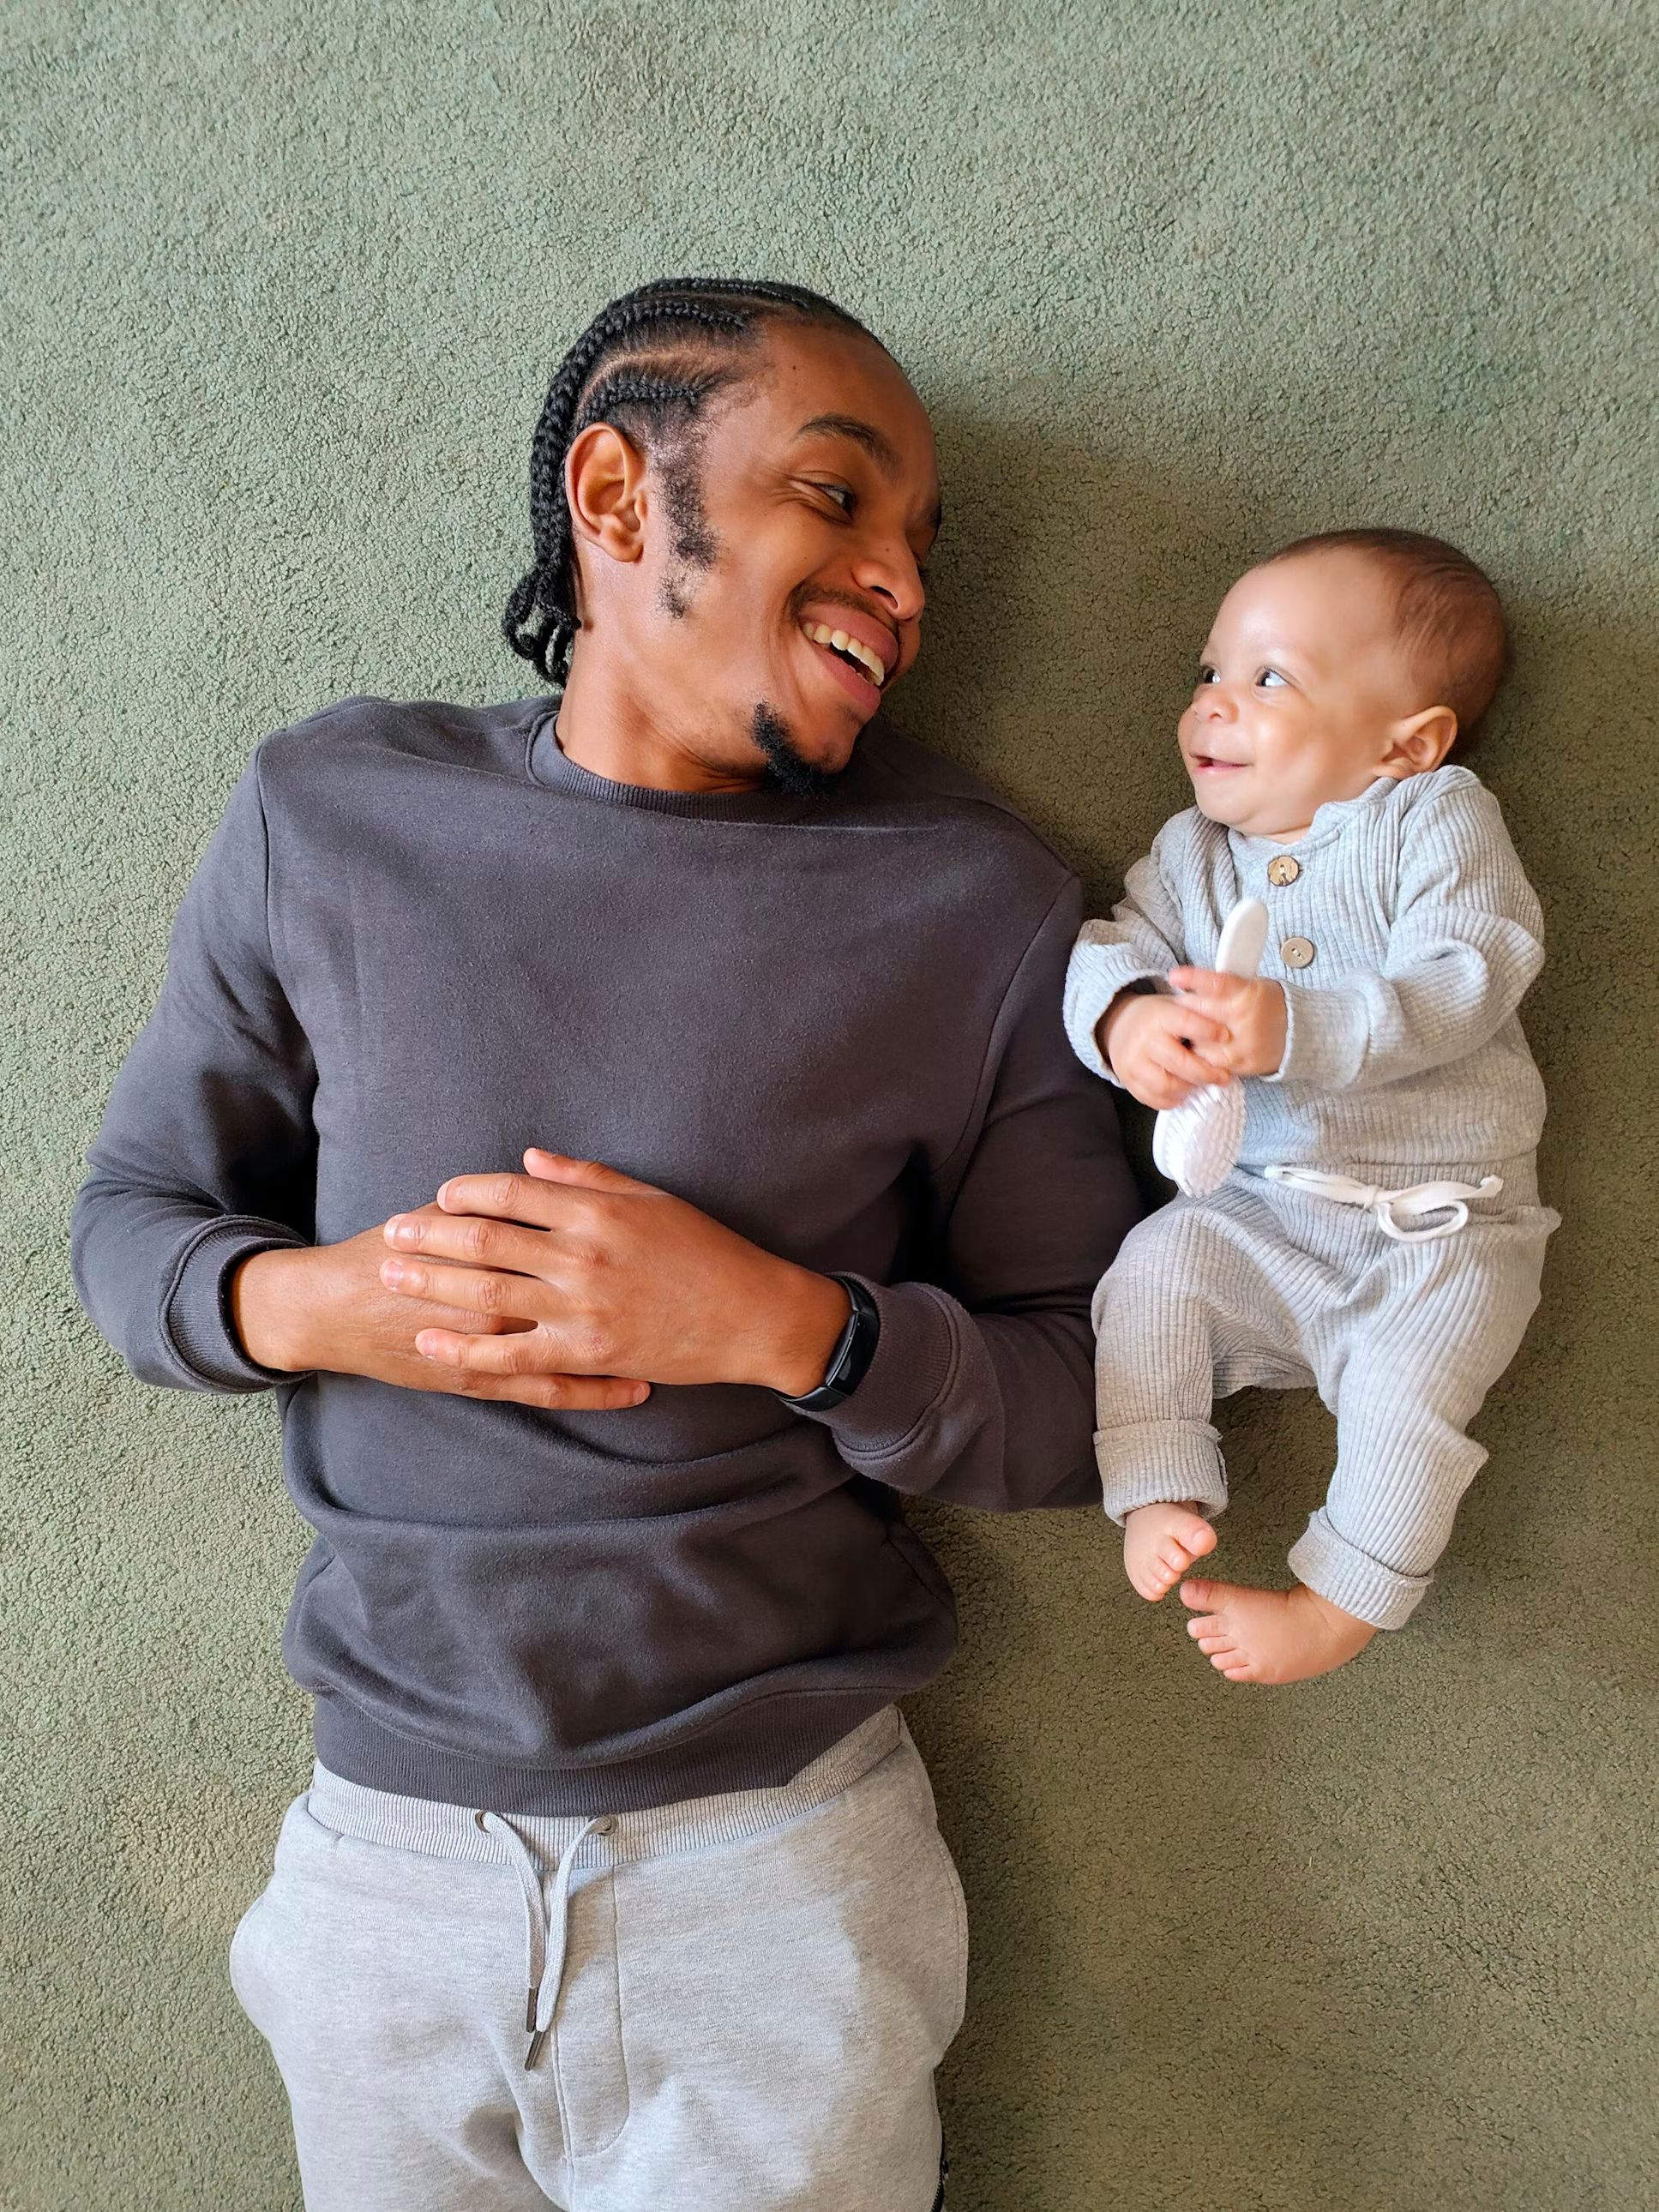 A man and baby lying on the floor smiling